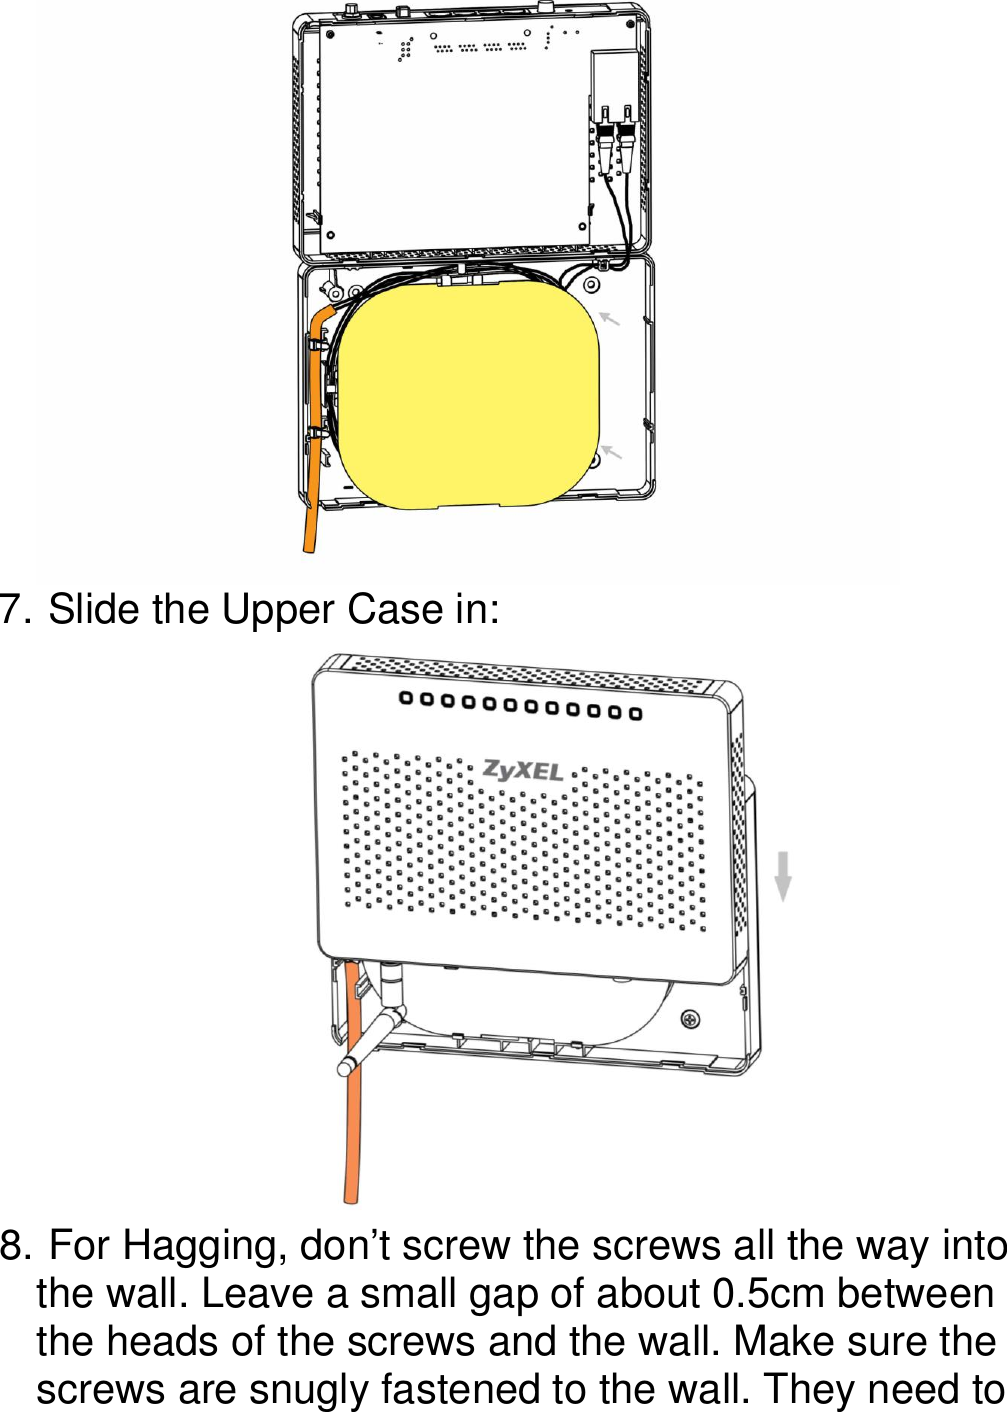    7.  Slide the Upper Case in:  8.  For Hagging, don’t screw the screws all the way into the wall. Leave a small gap of about 0.5cm between the heads of the screws and the wall. Make sure the screws are snugly fastened to the wall. They need to 